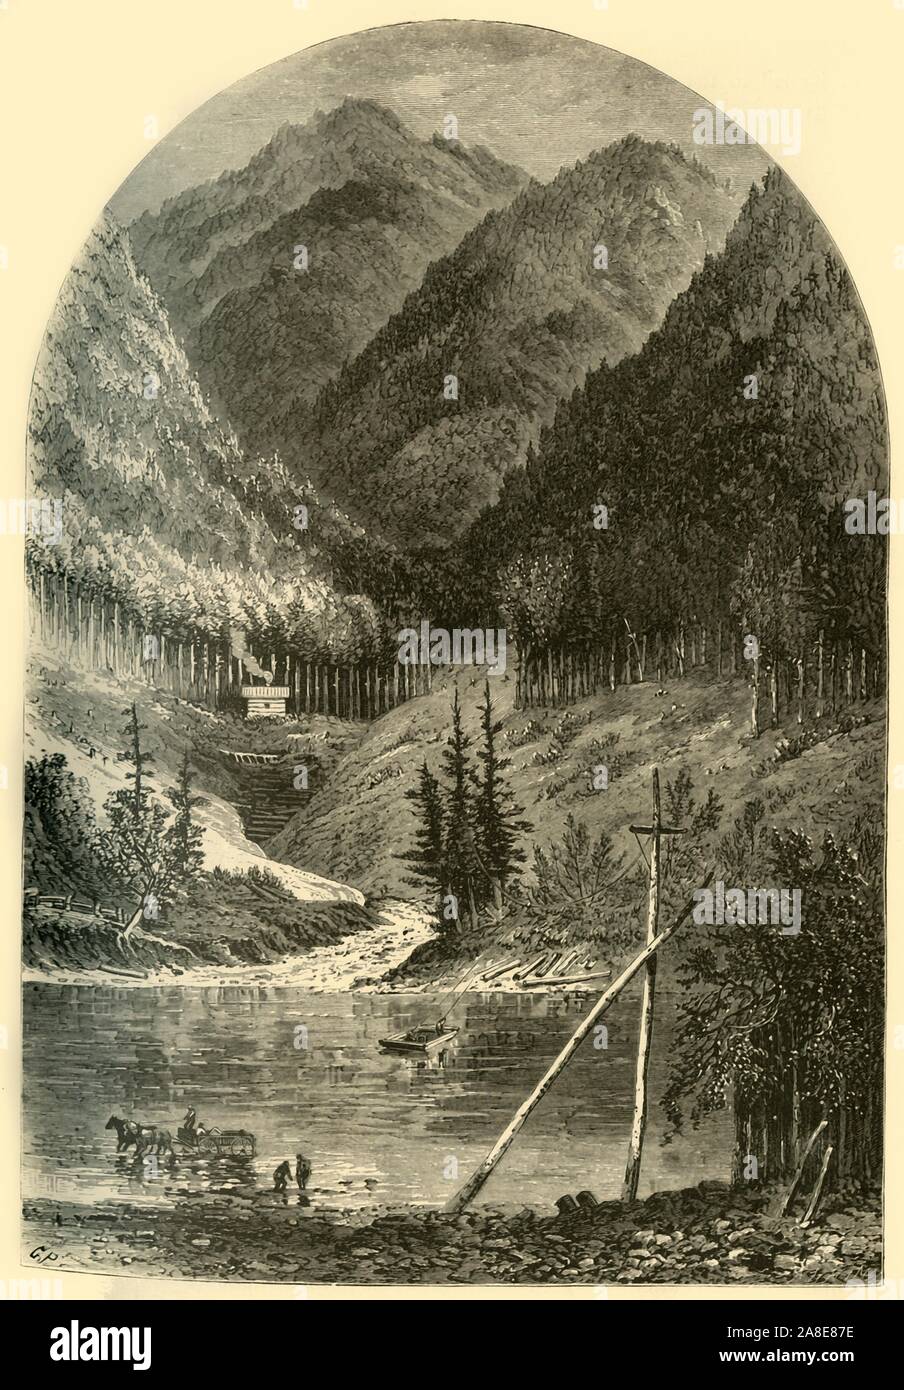 'Ferry at Renovo', 1874. River crossing at Renovo, Pennsylvania, USA. 'There is a mountain-road here which penetrates through the country to the southward, and the teams cross the river in a dreadfully rickety ferry. This is a species of flat-boat, which is propelled across by a man hauling on a rope suspended from the high south bank to a huge pole on the other shore. In the wintry days, when the river is turbulent and the winds are high, the crossing here is not very pleasant; but in the jolly summer-tide it becomes a kind of pastime, and the visitors from large cities are so amused at this Stock Photo